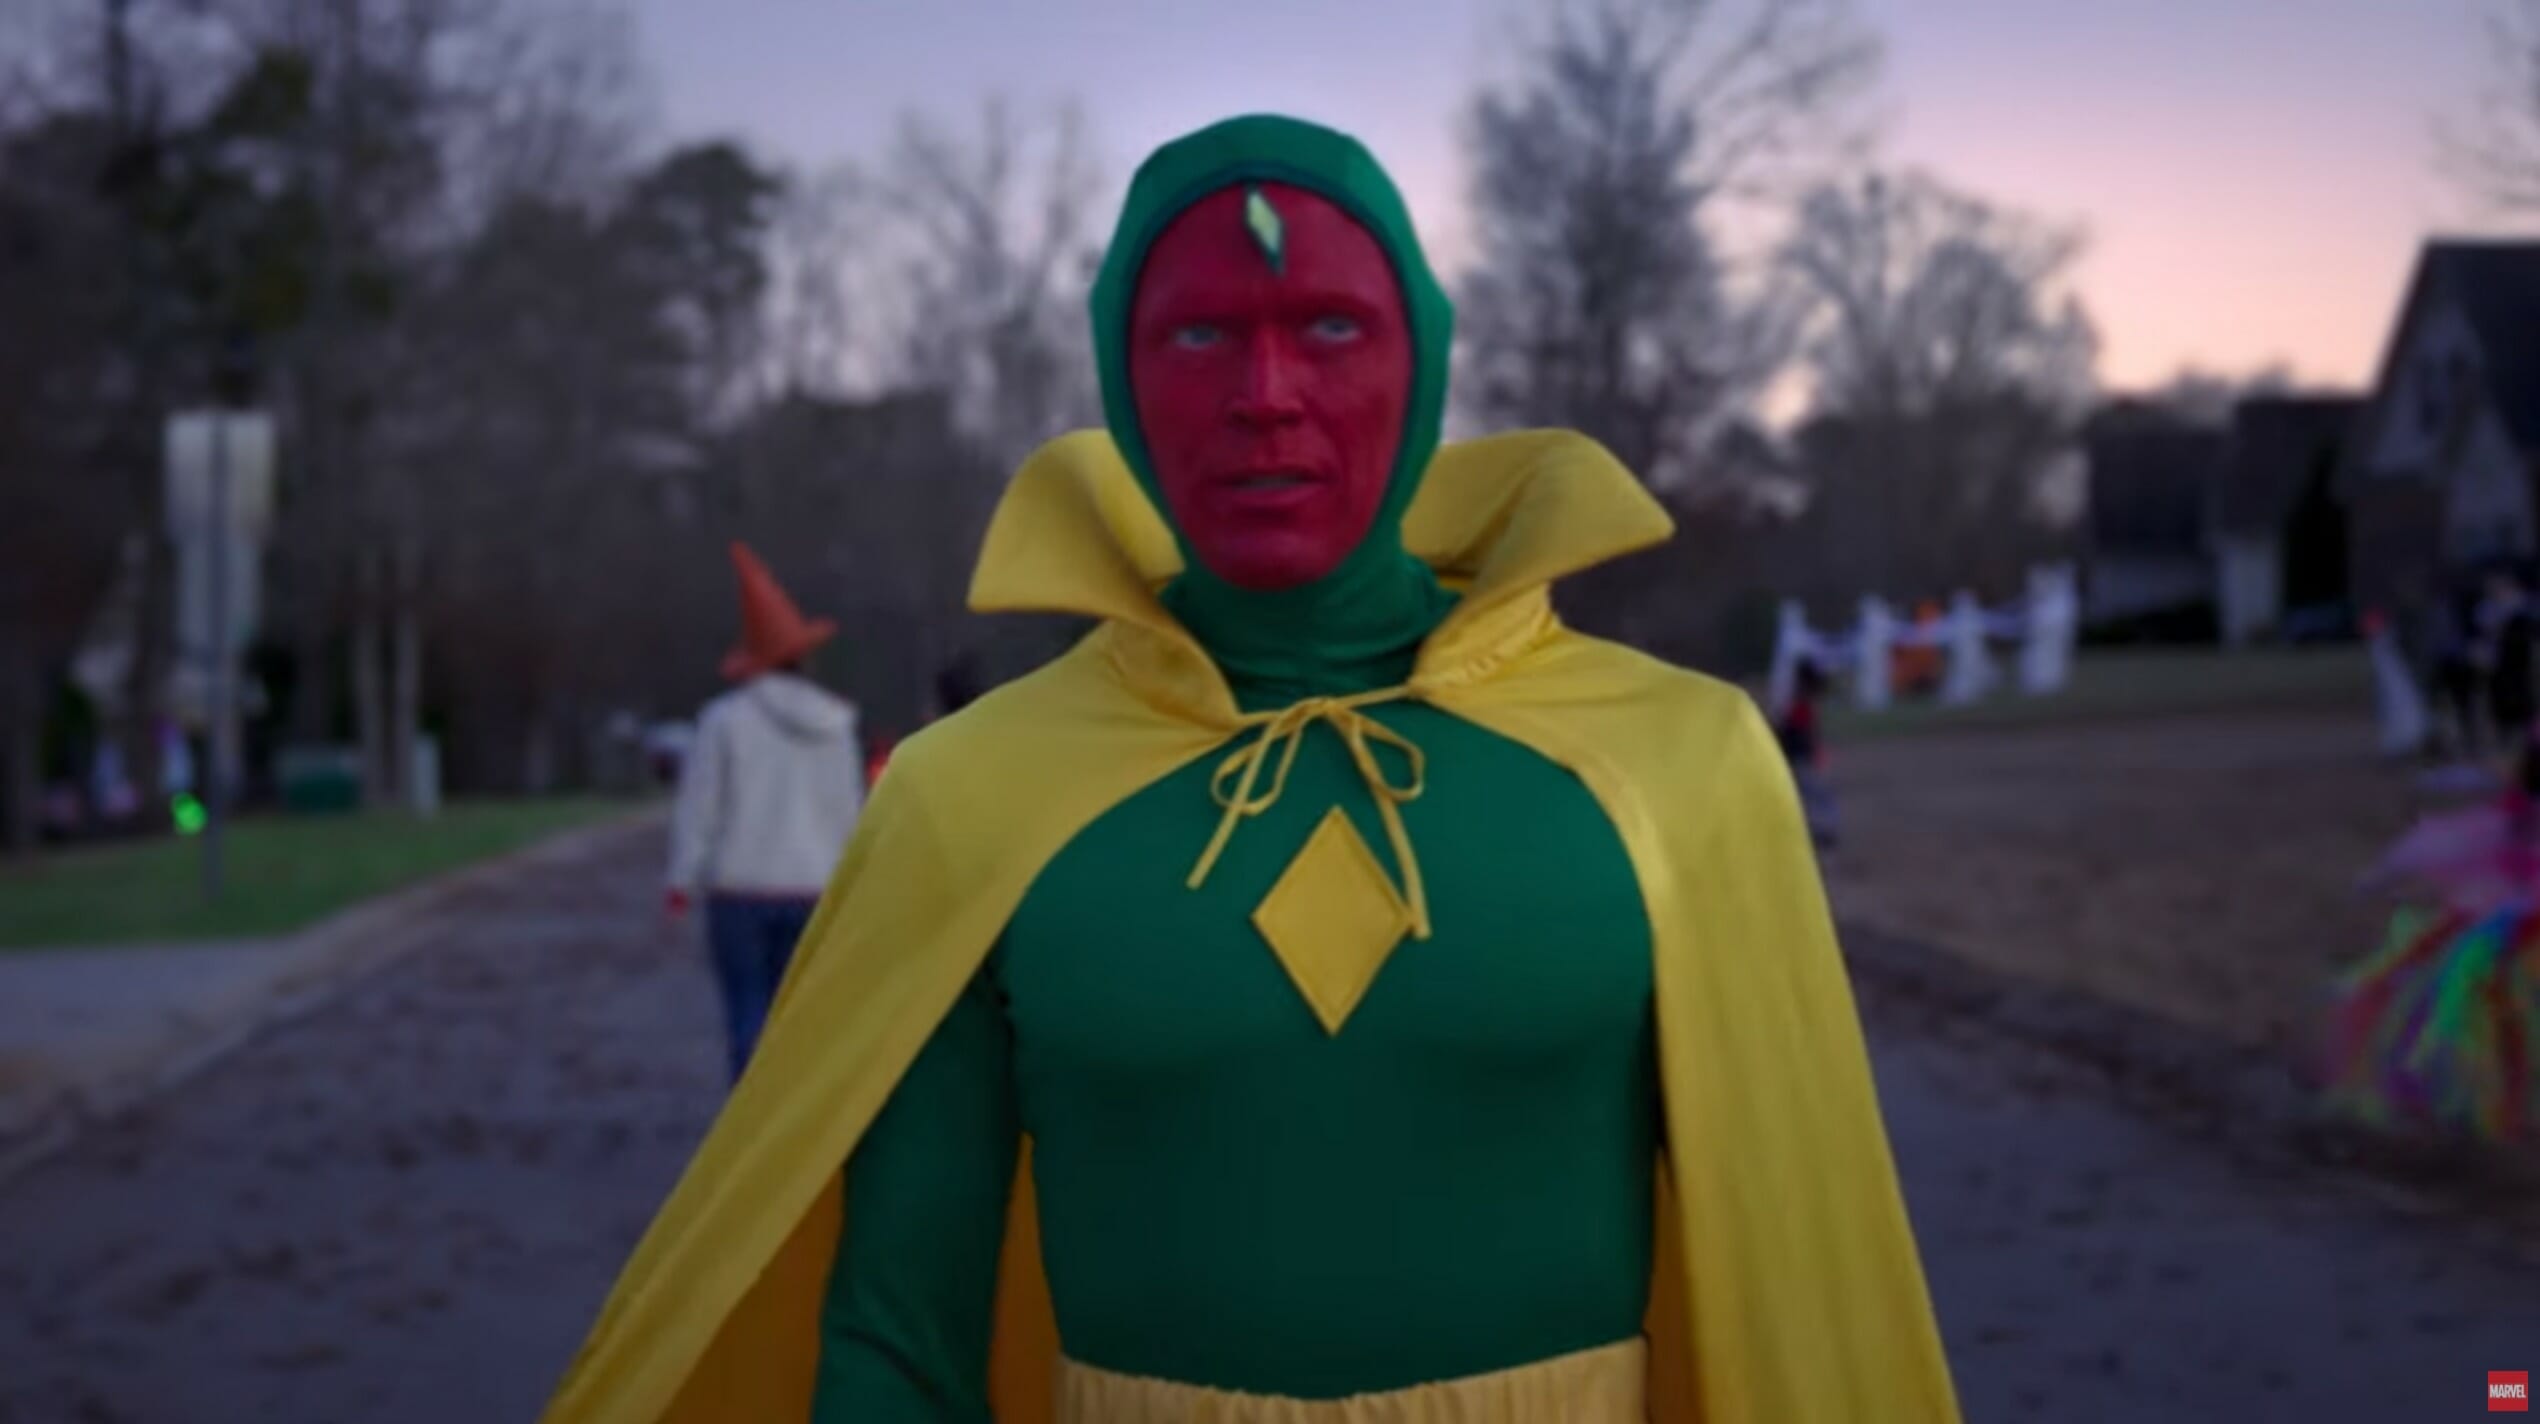 WandaVision trailer shows classic Scarlet Witch and Vision